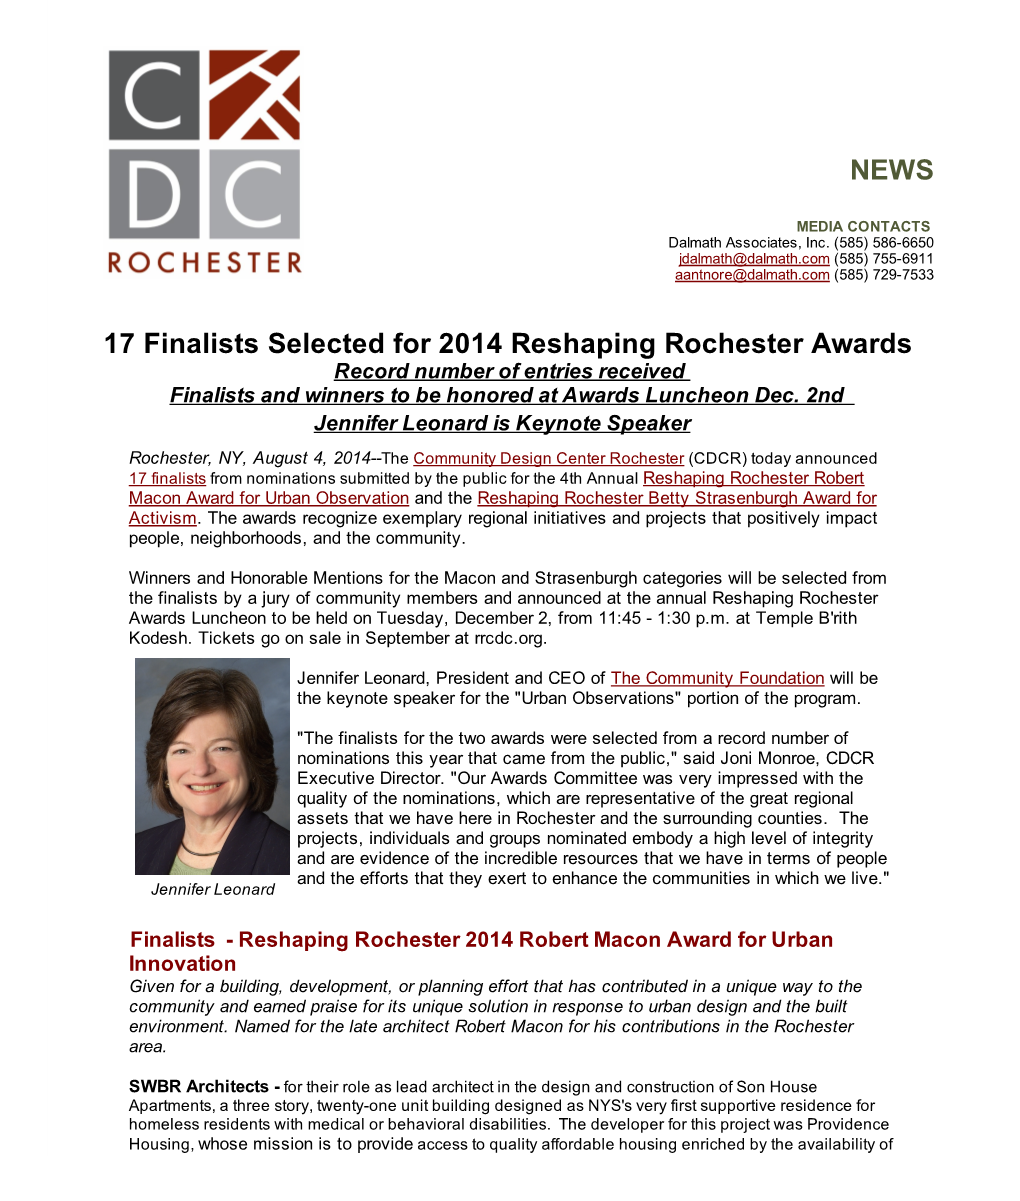 NEWS 17 Finalists Selected for 2014 Reshaping Rochester Awards